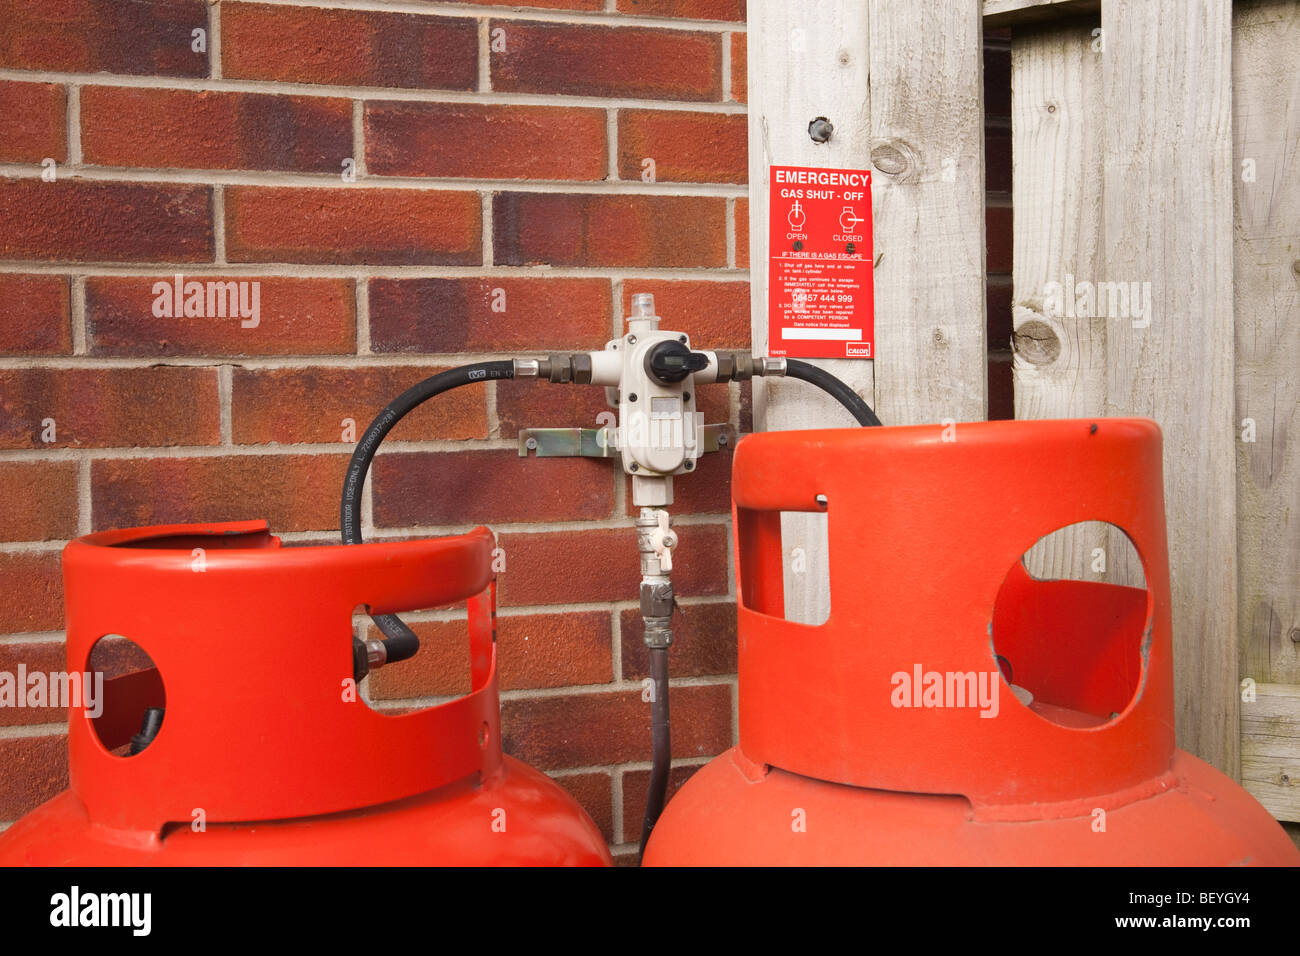 Britain, UK. Calor Gas cylinders and two hose regulator valve fitting on a house wall with emergency gas shut off instructions. Stock Photo